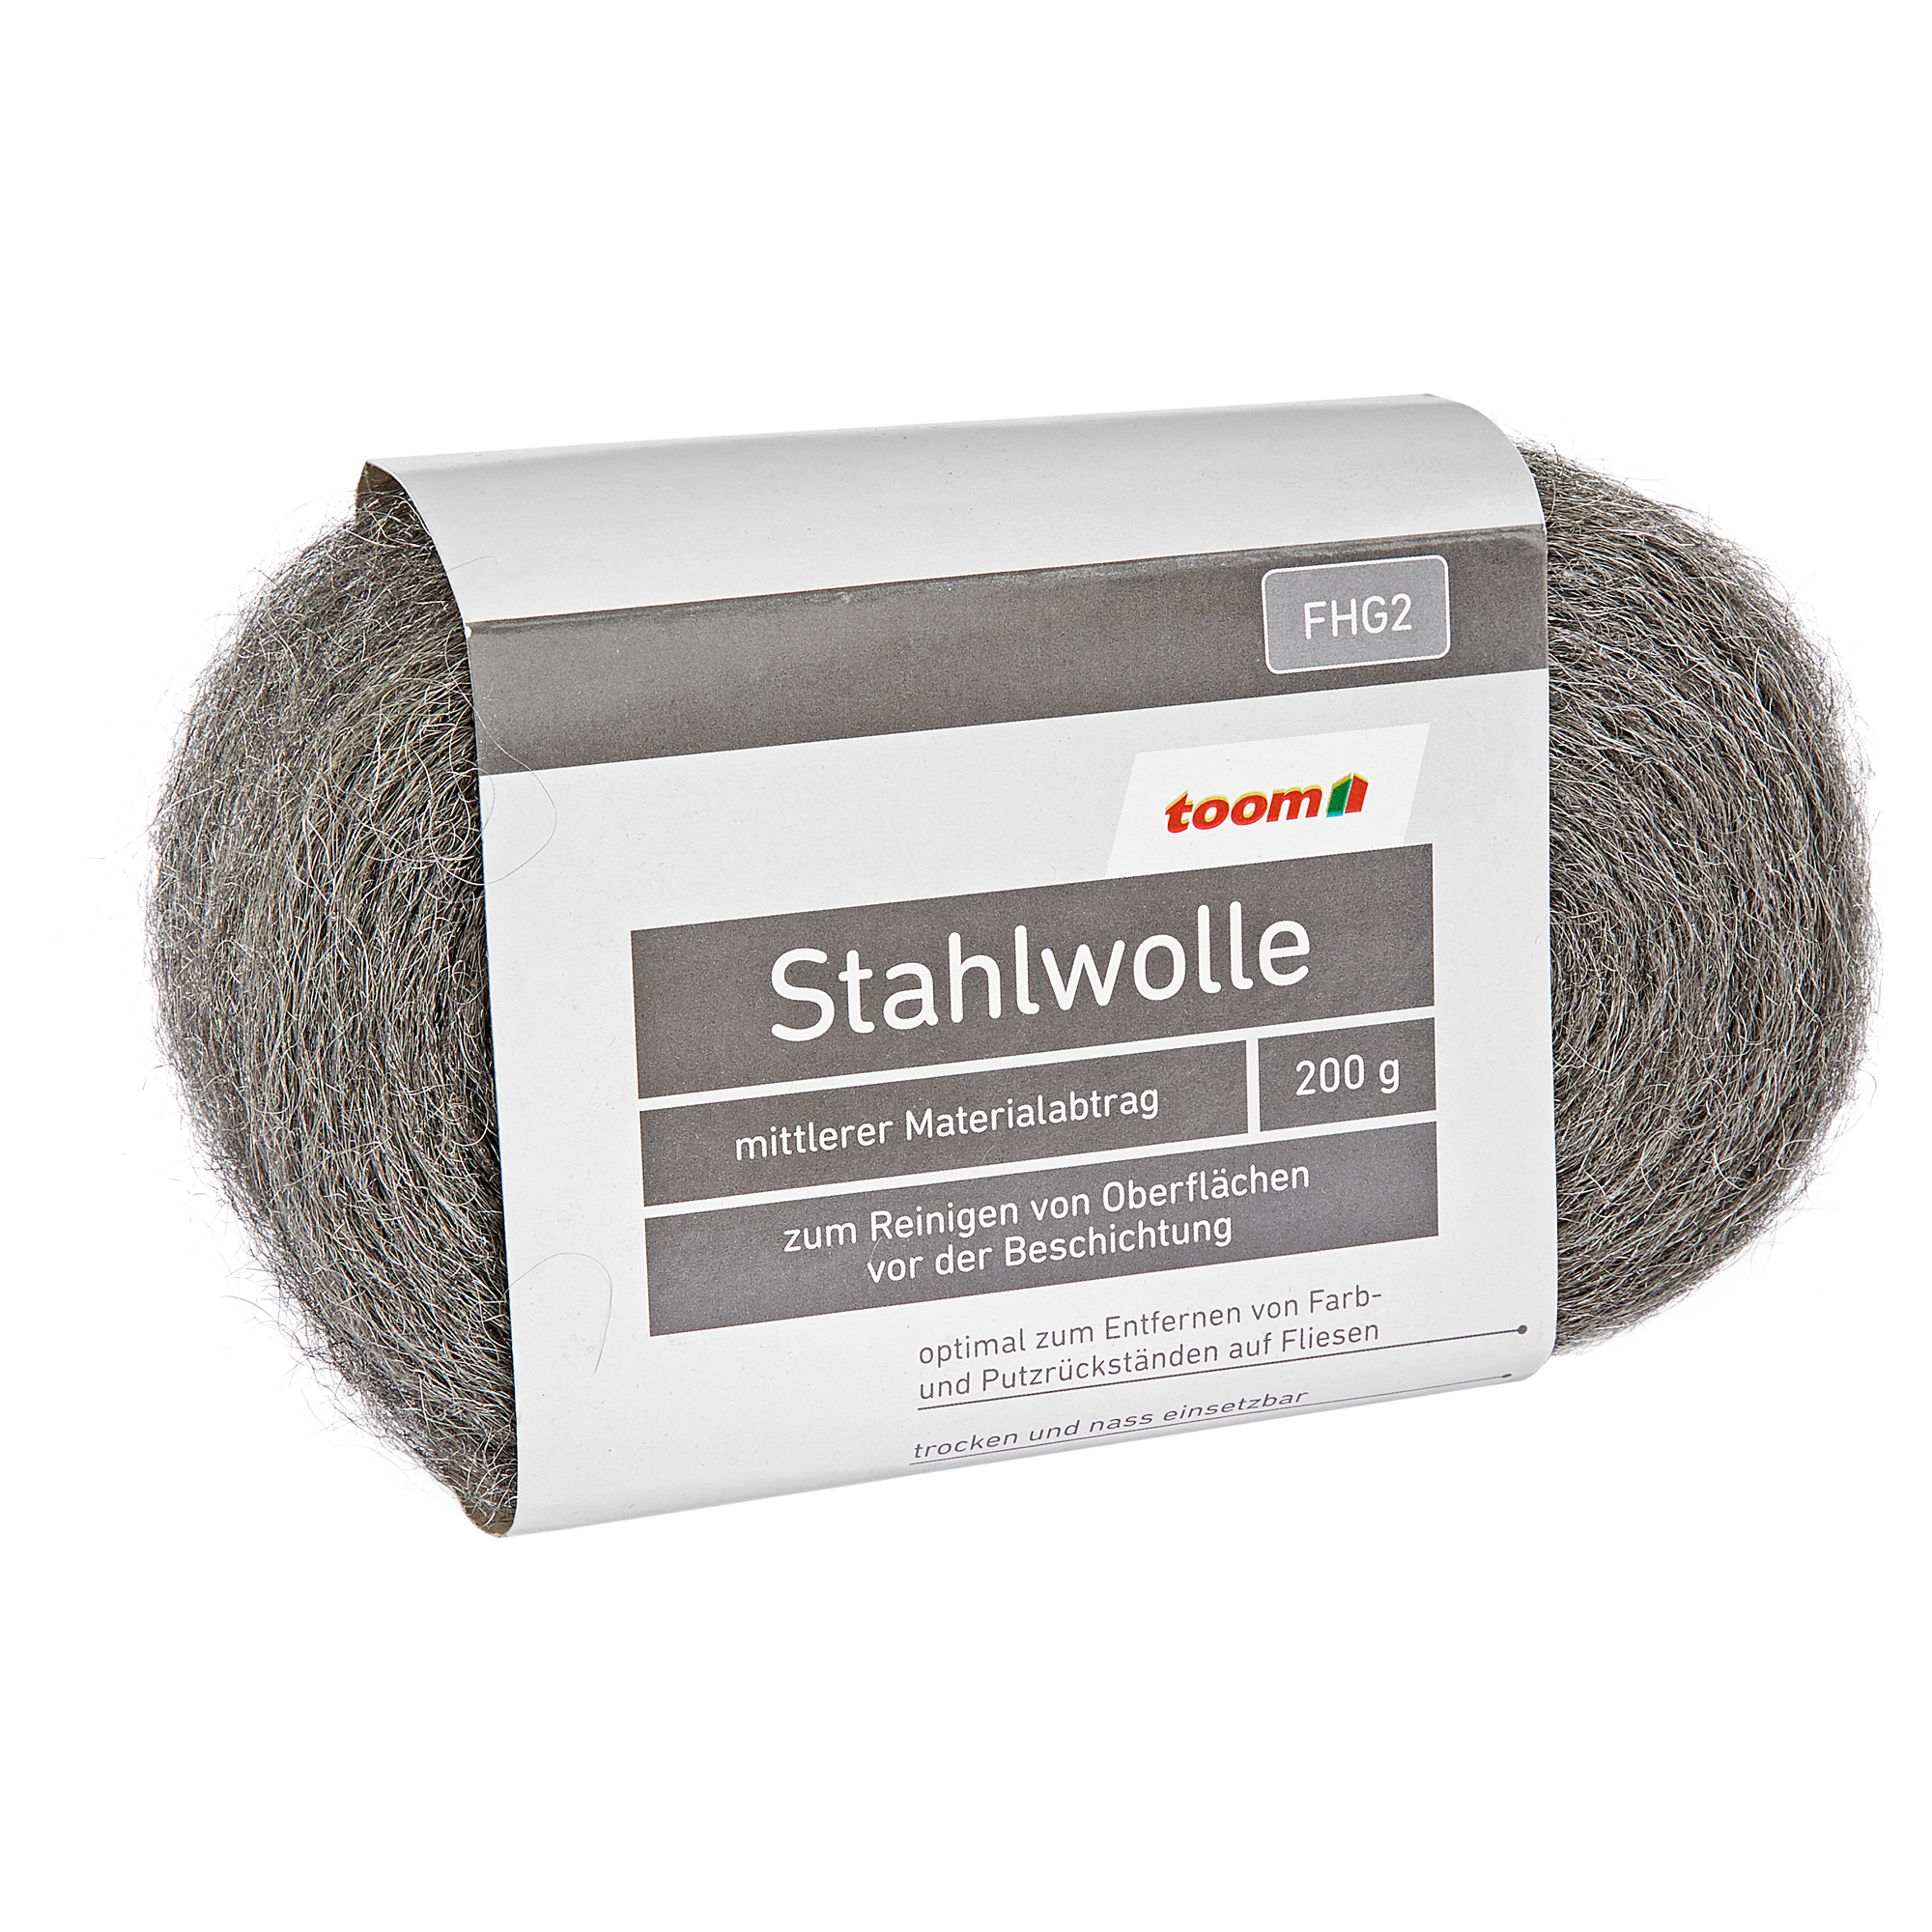 Stahlwolle 200 g + product picture